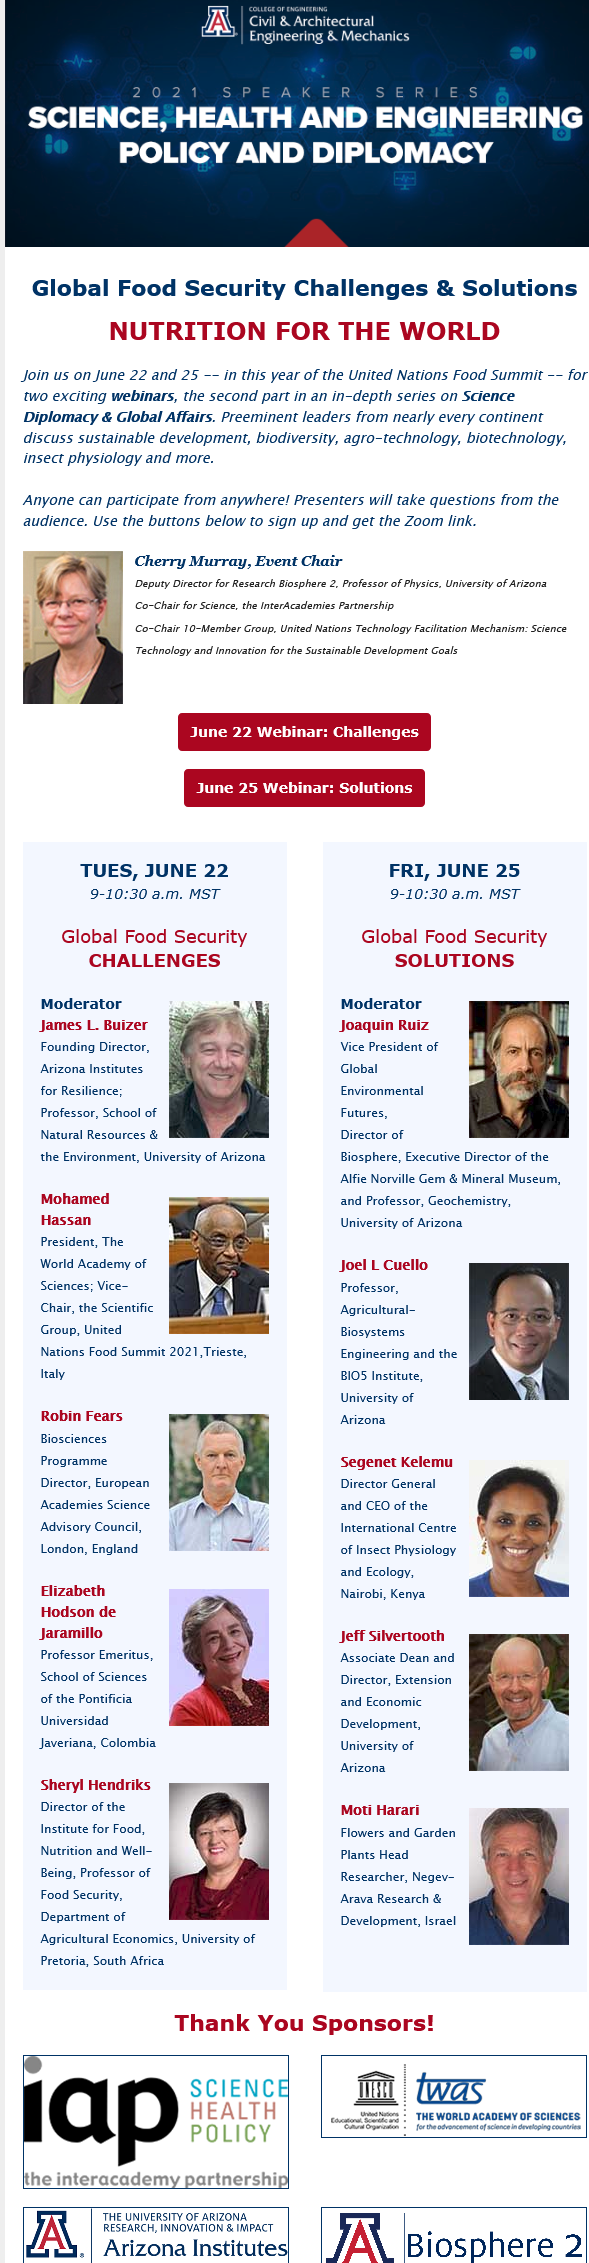 Global Food Security Challenges & Solutions